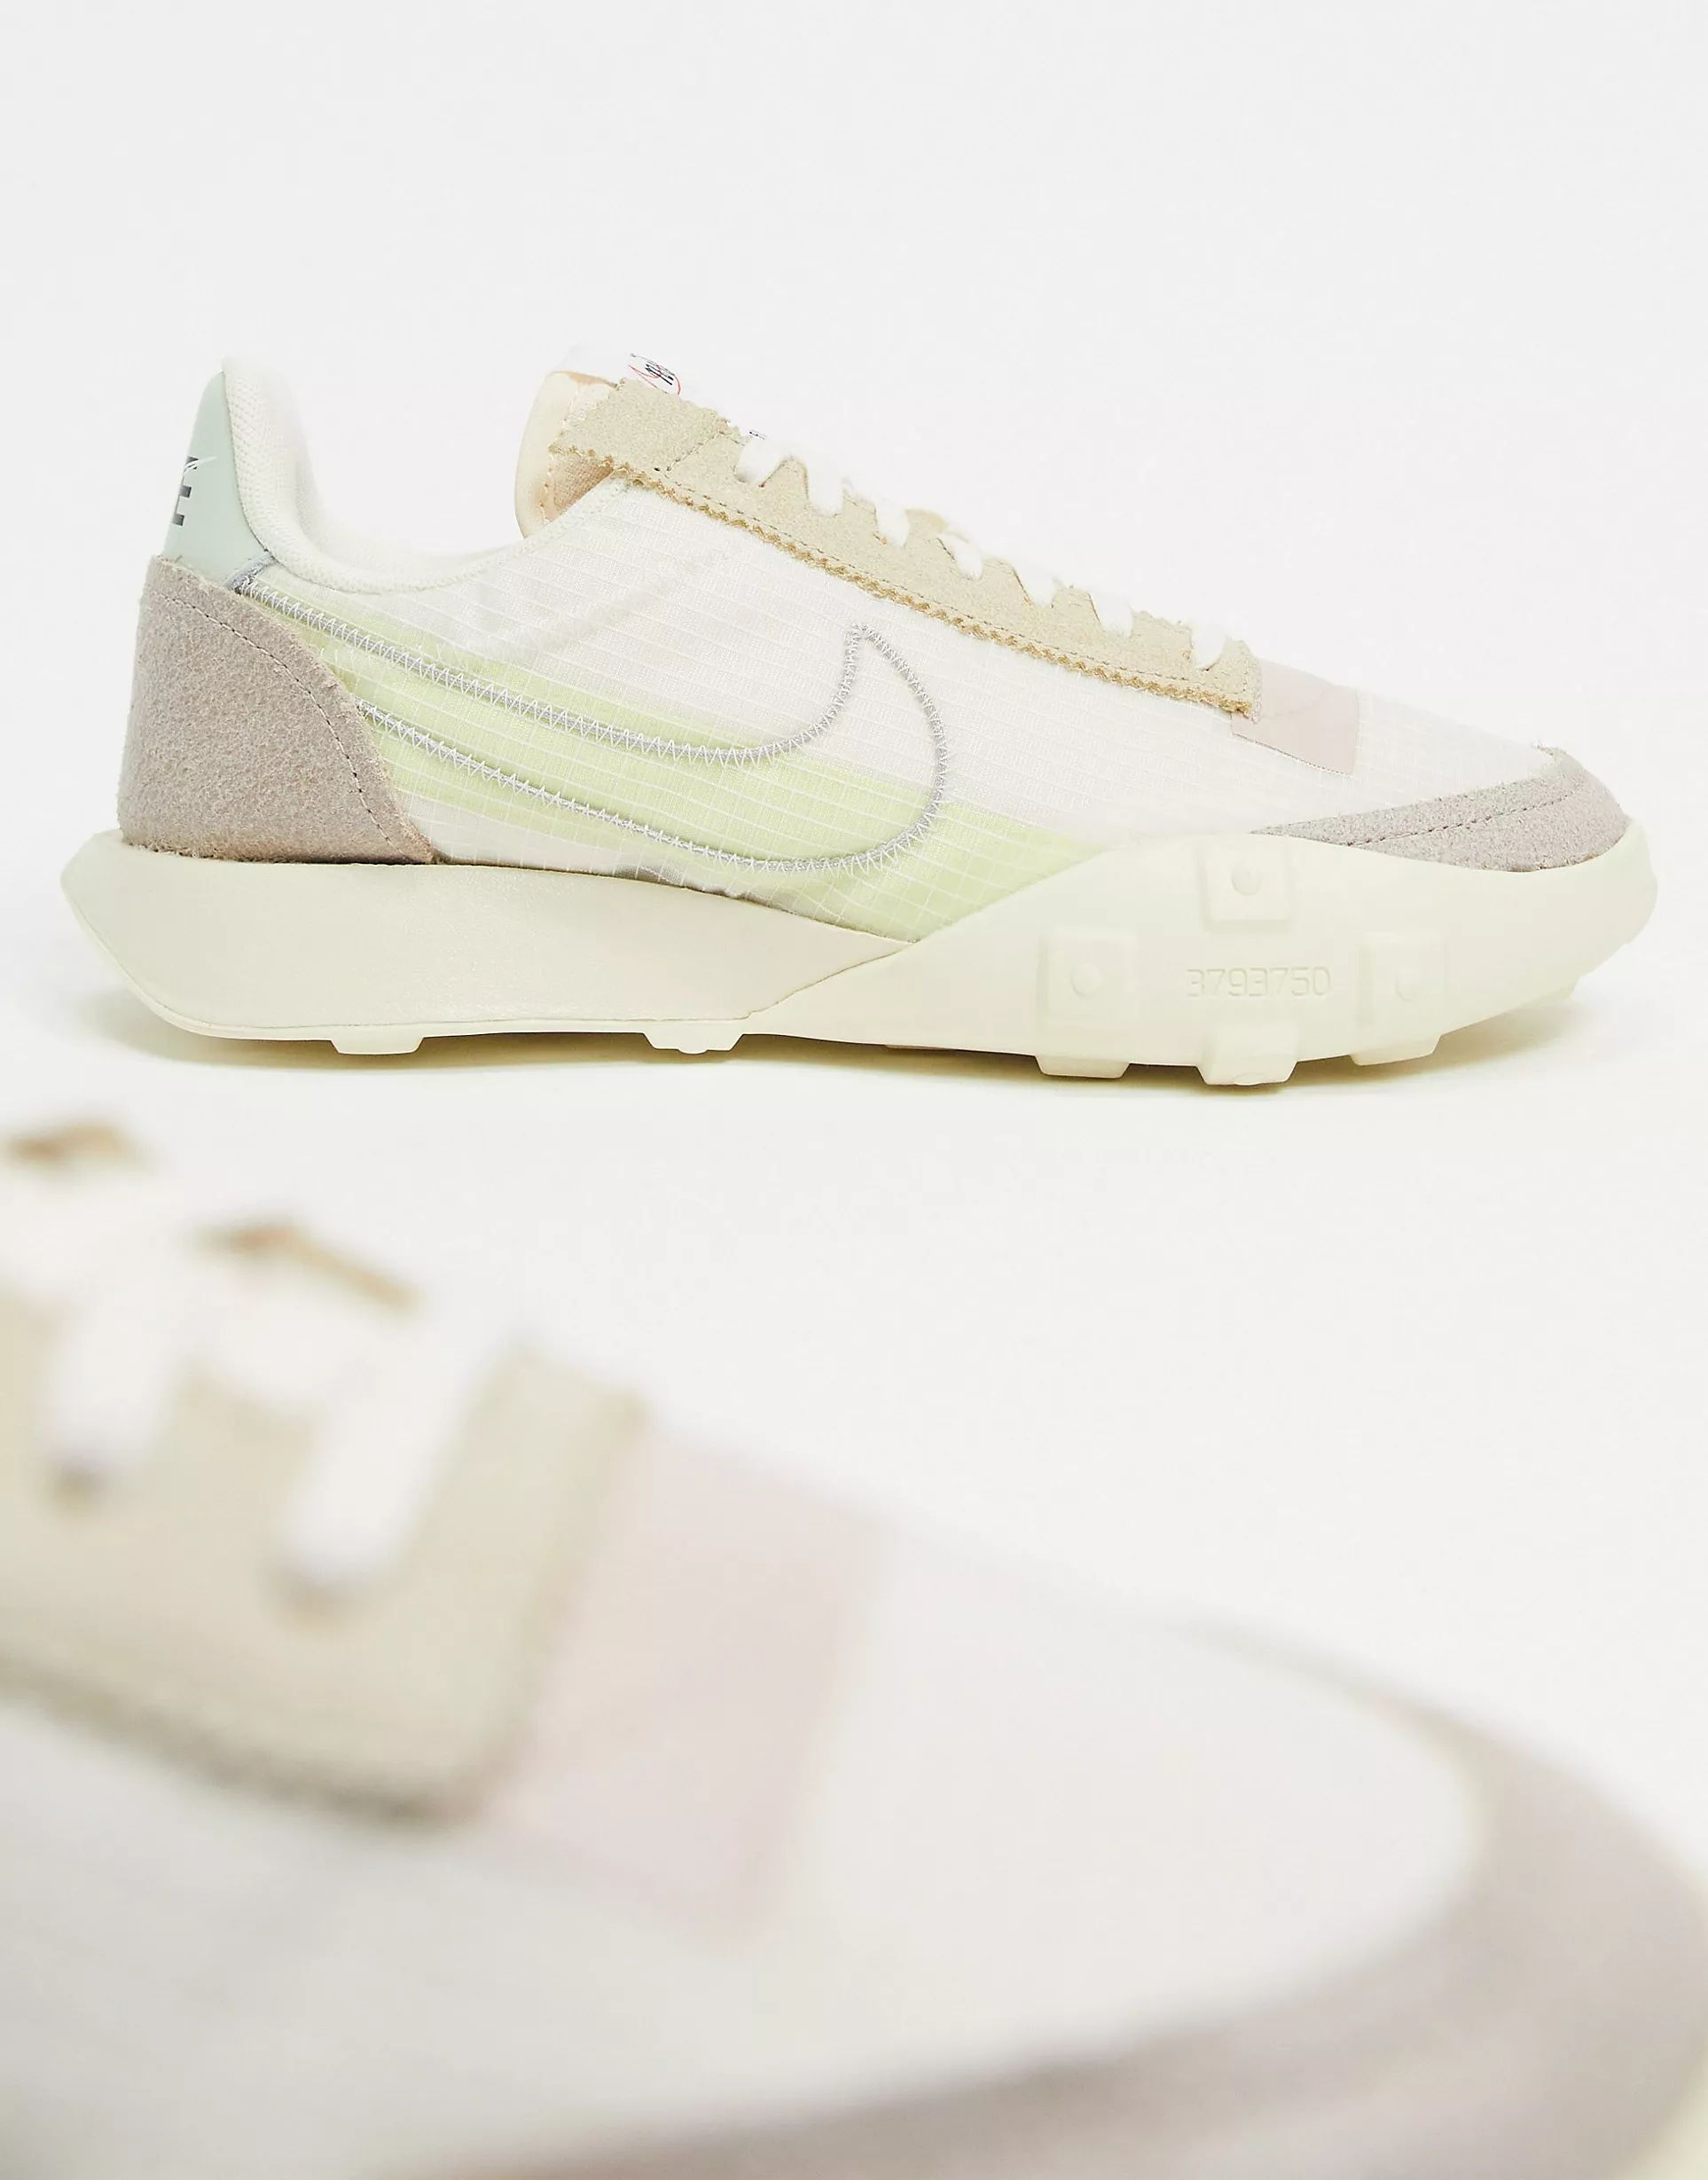 Nike Waffle Racer LX sneakers in beige and gray | ASOS (Global)